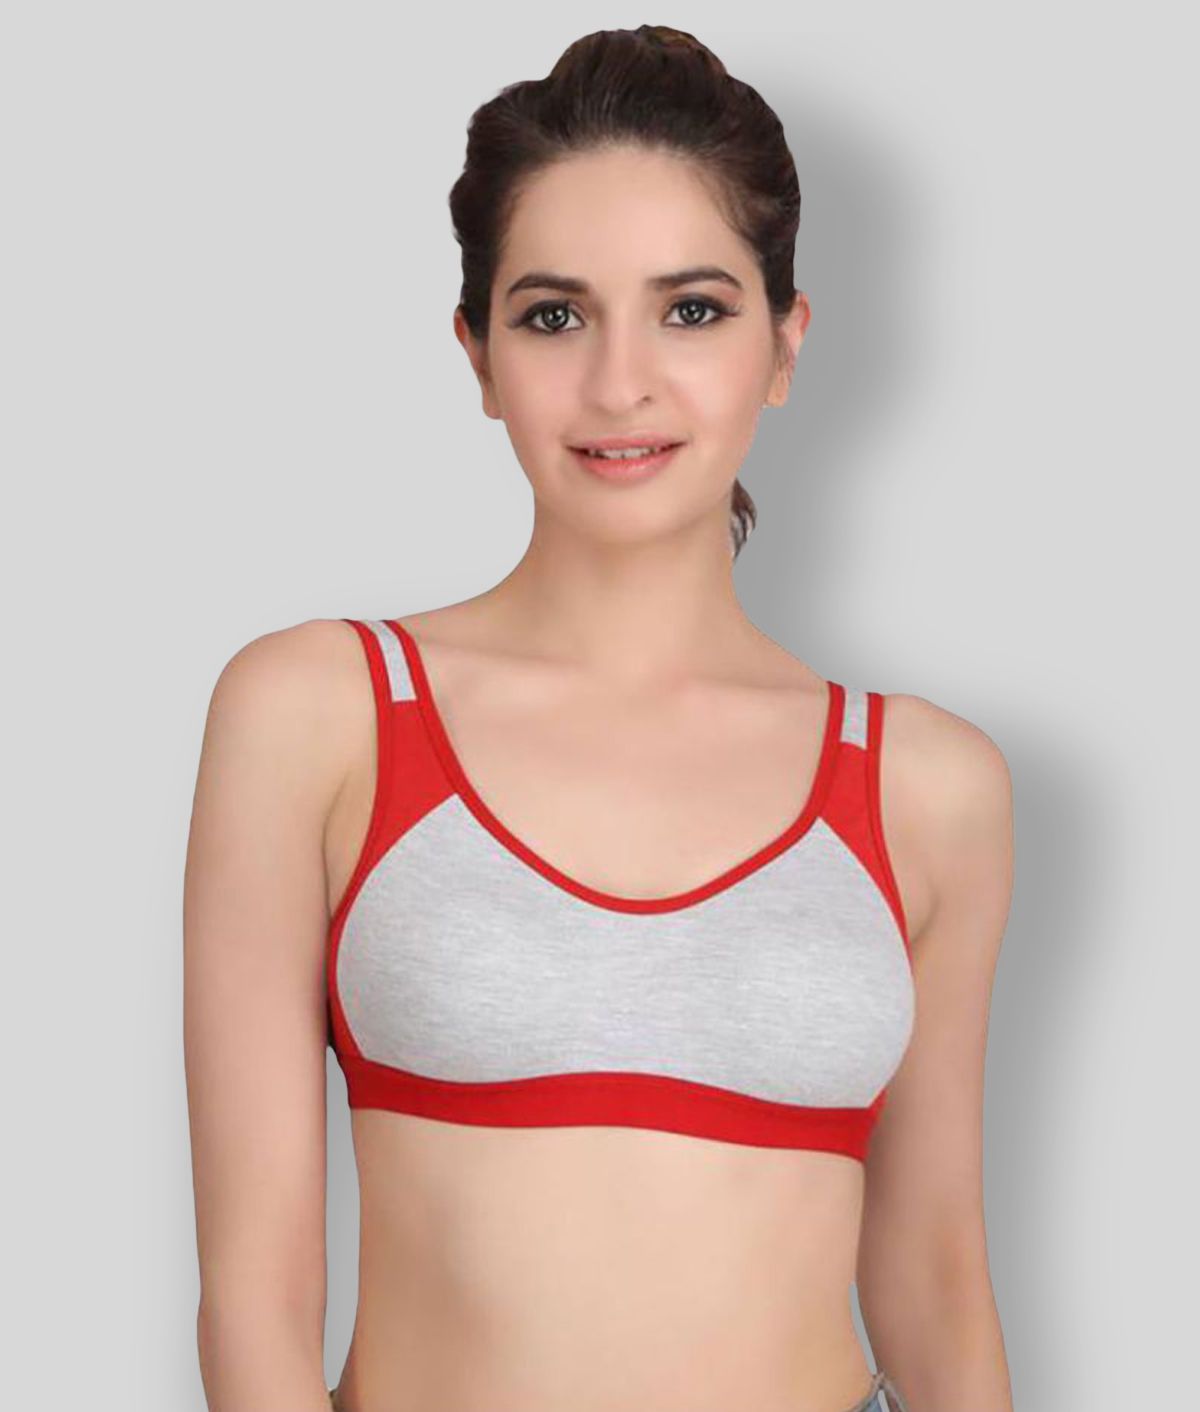 GFGS - Multicolor Cotton Non - Padded Women's Everyday Bra ( Pack of 1 )